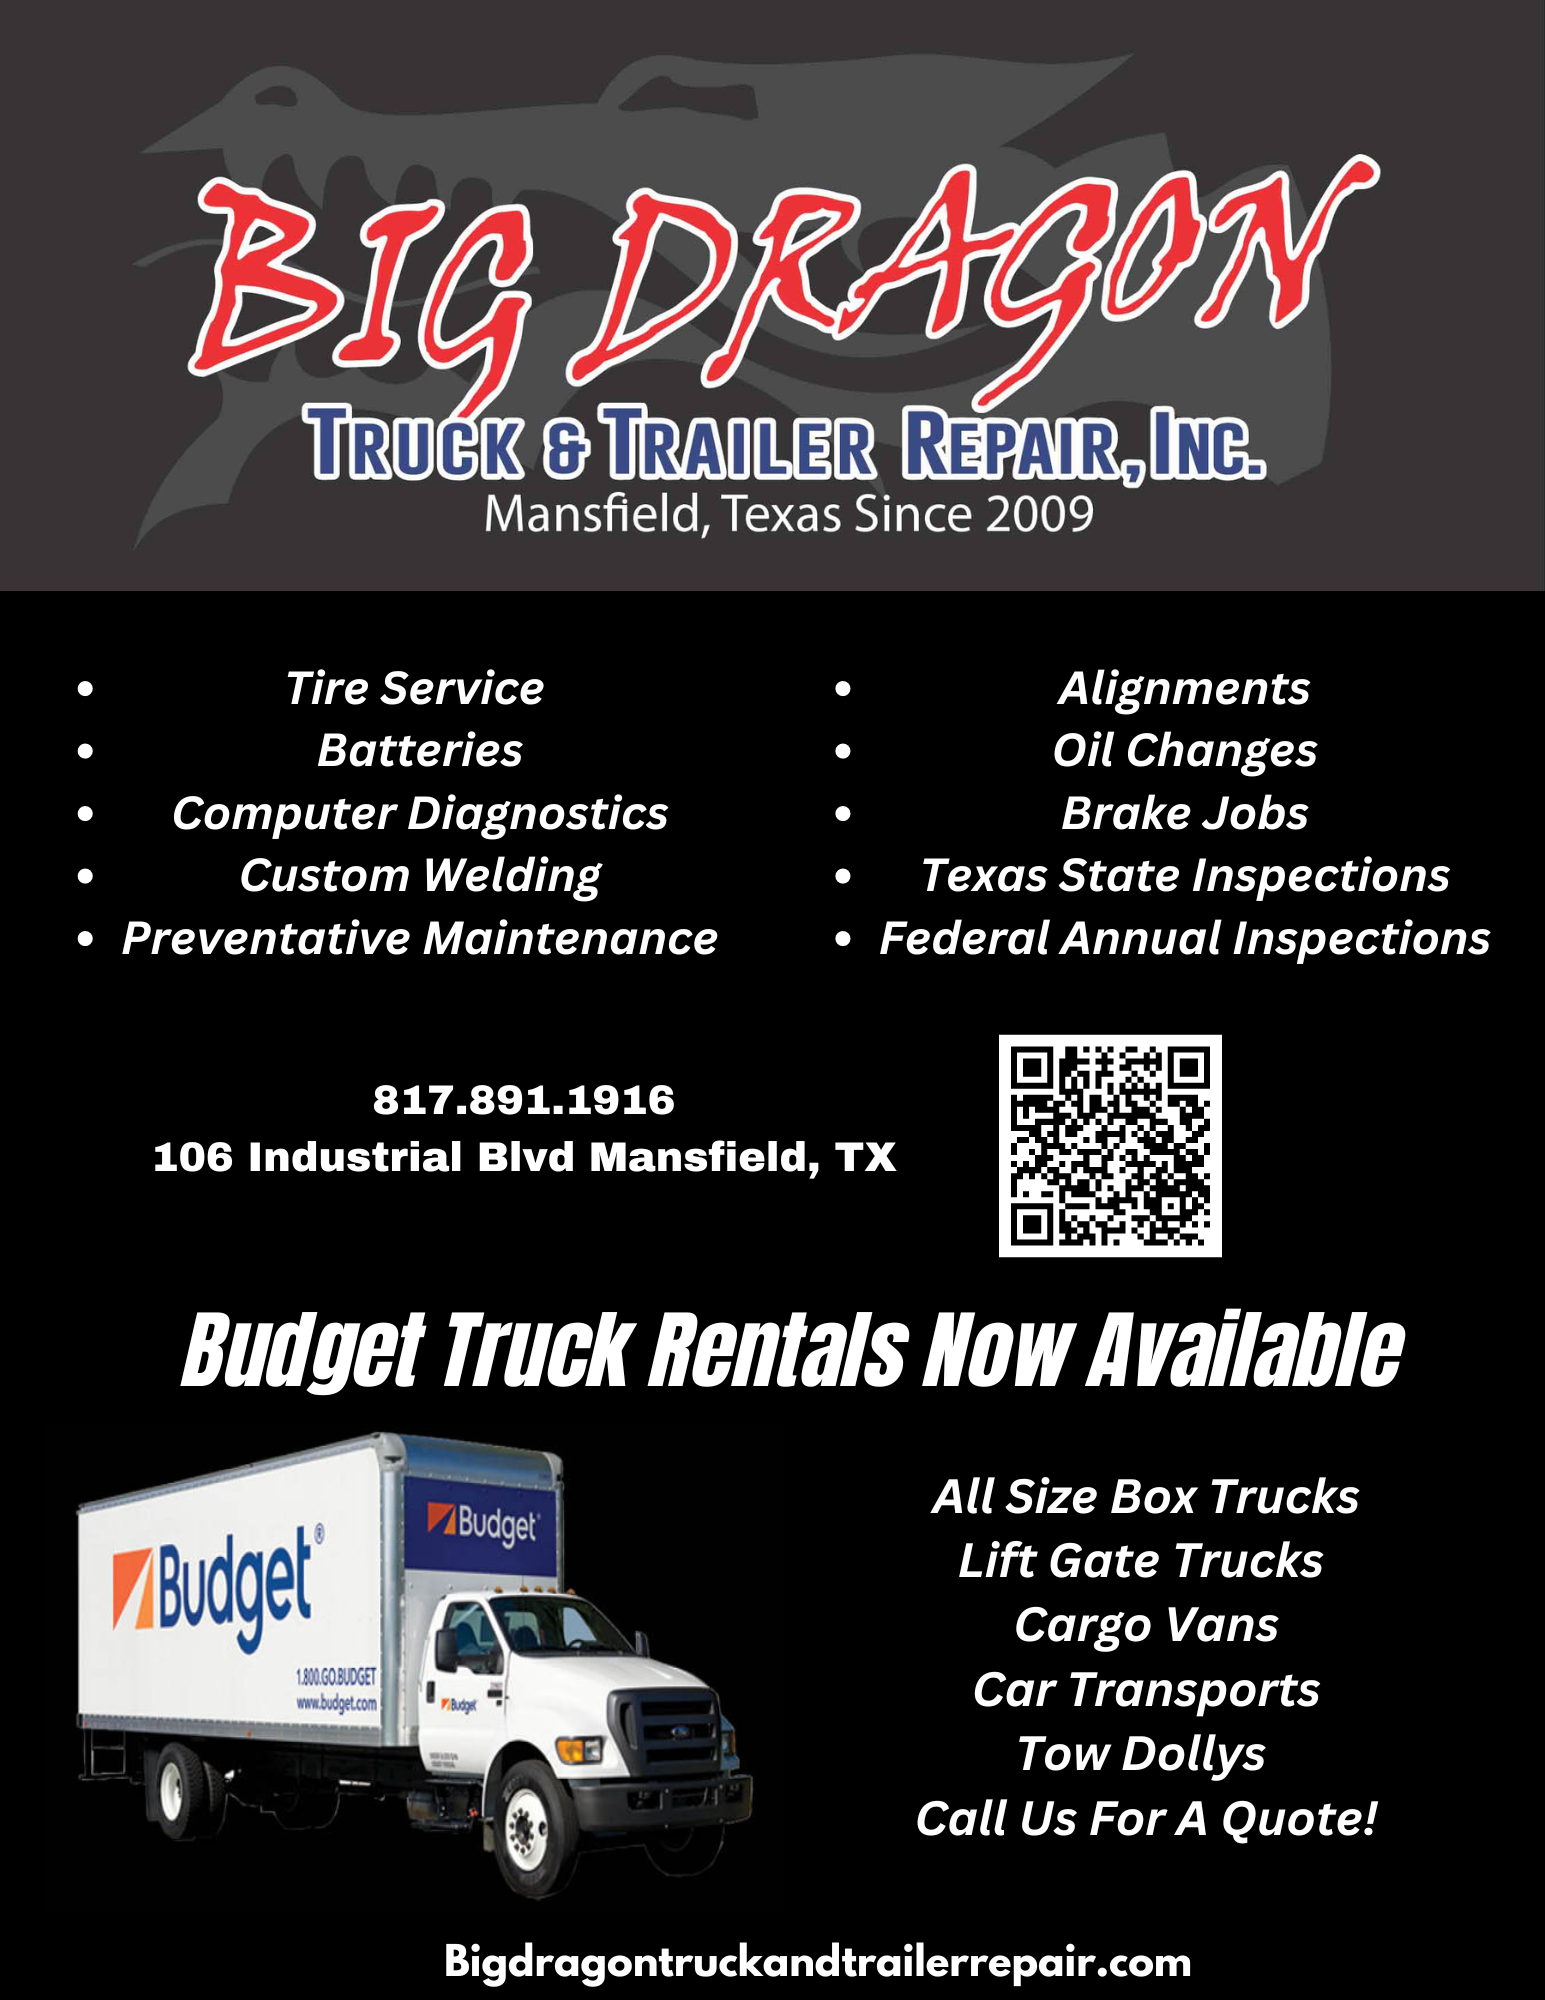 Budget Truck Rentals Now Available